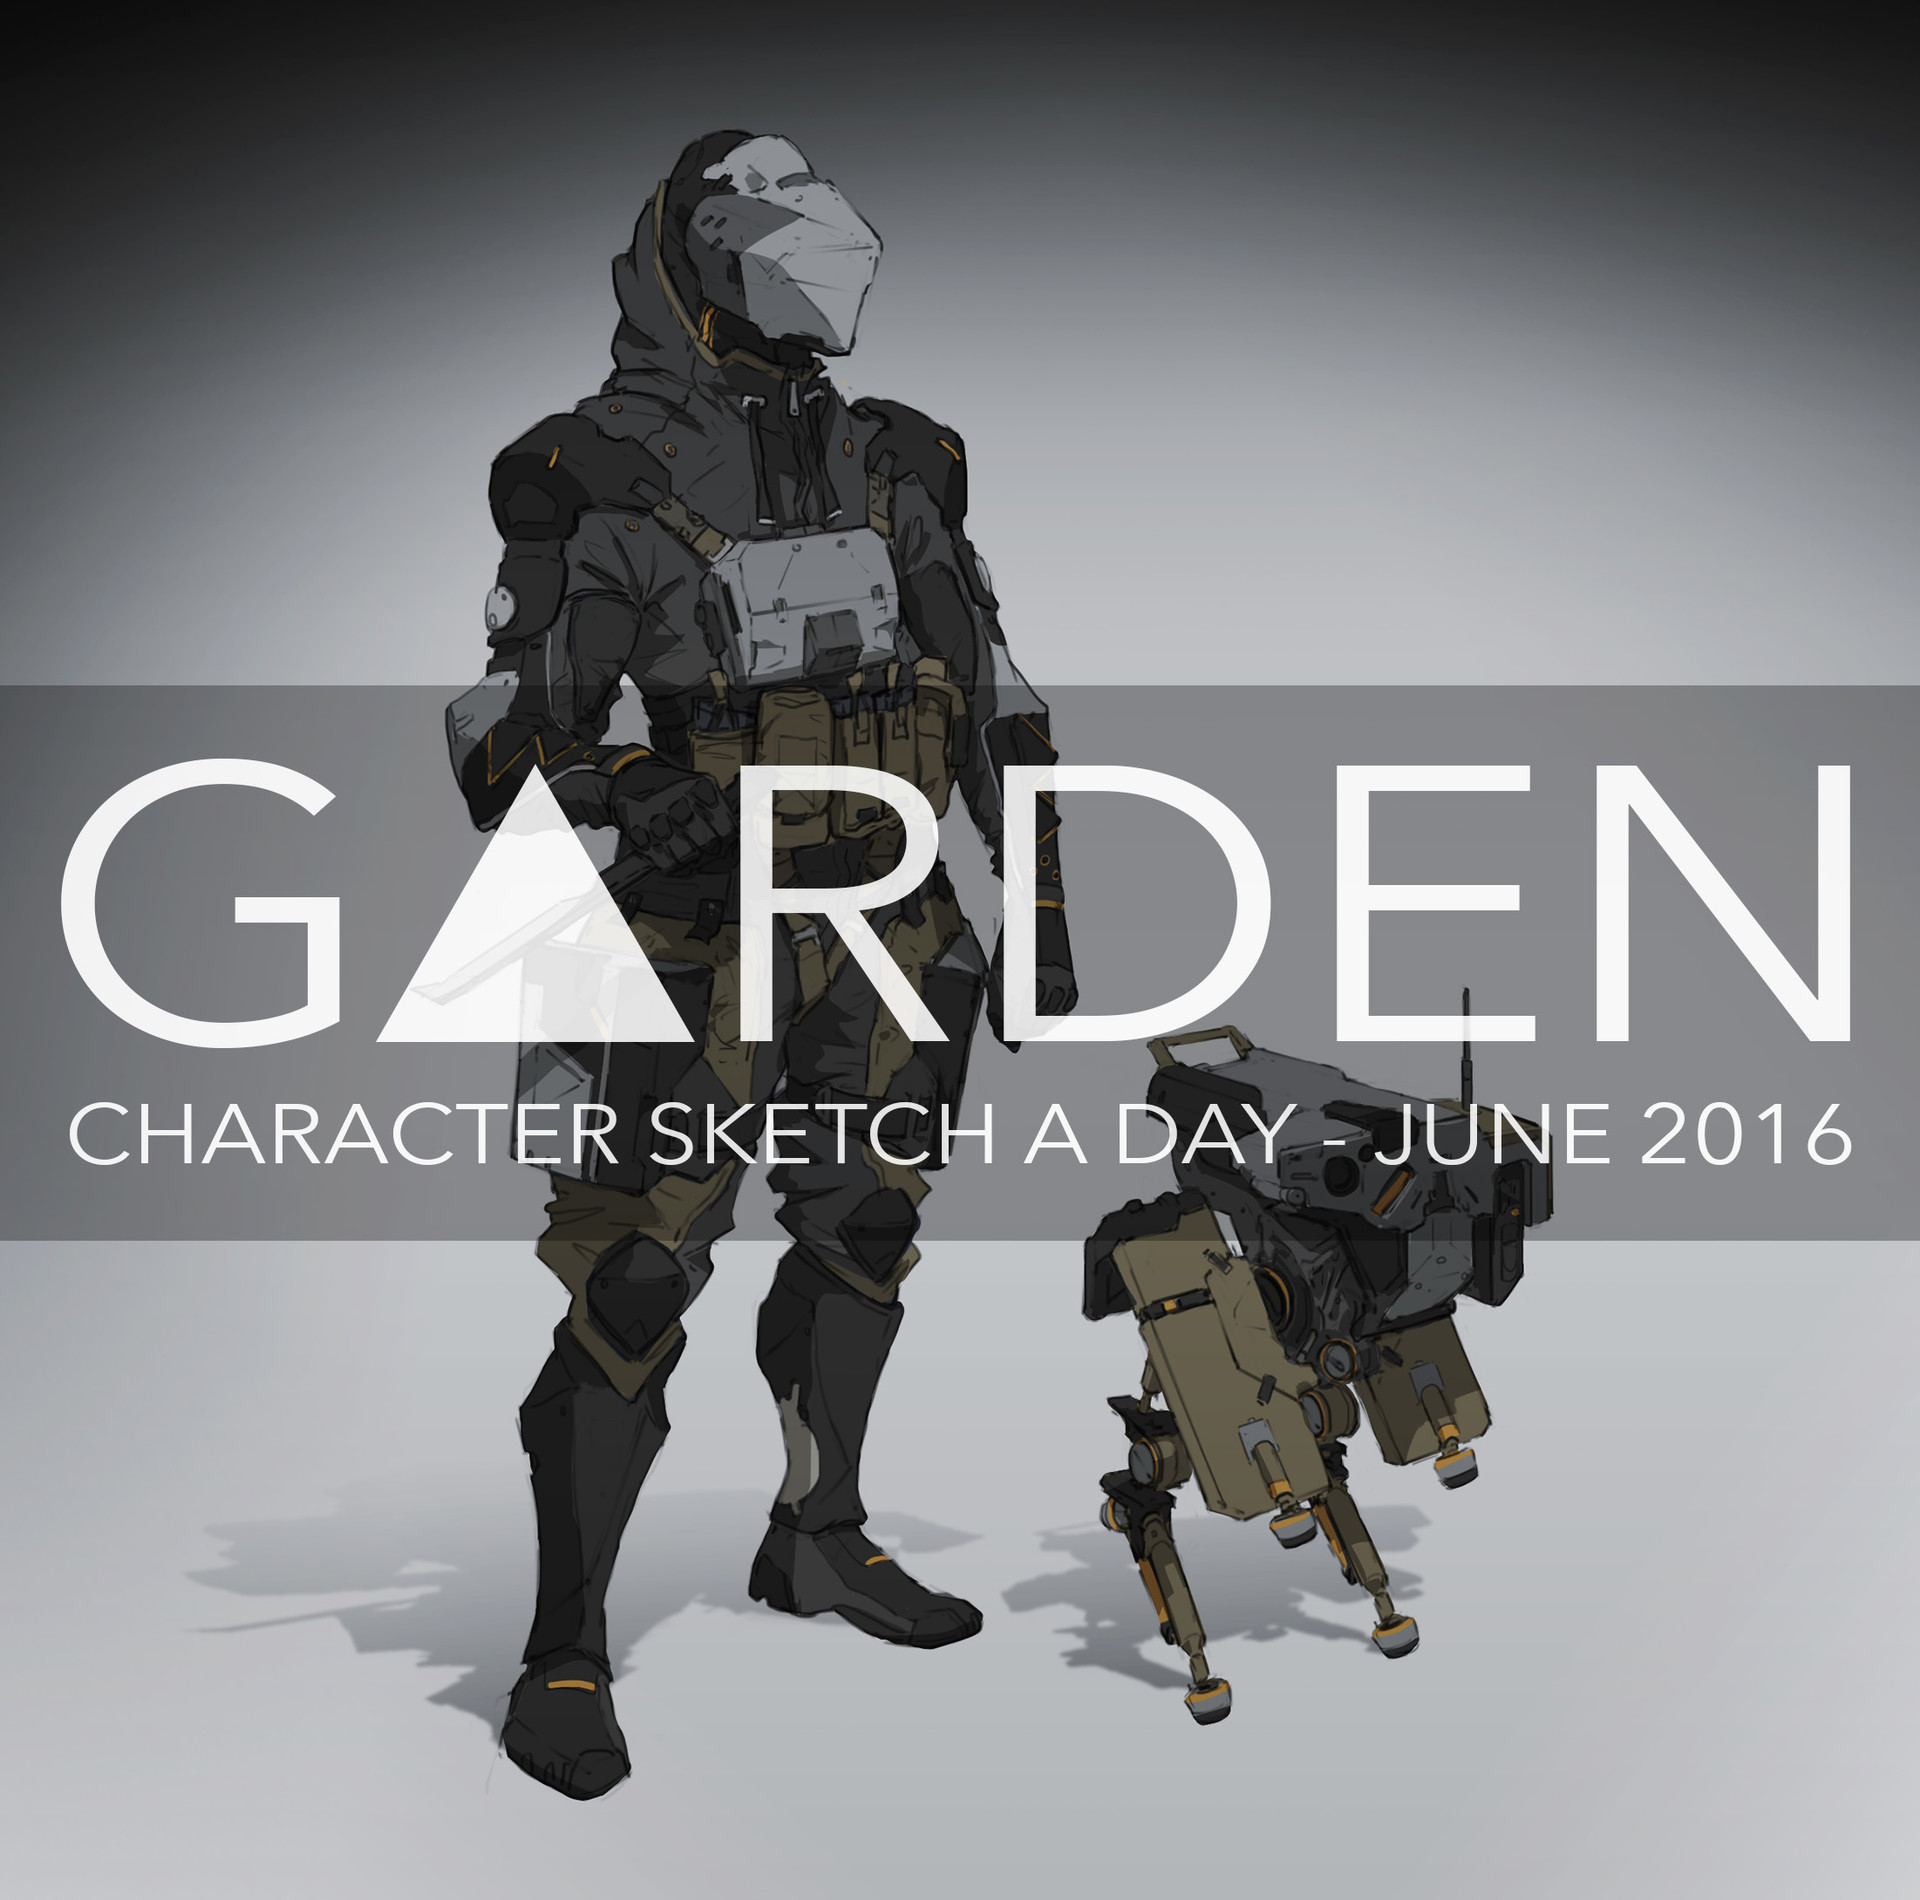 Tom Garden  Character Sketch a Day  JuneJuly 2016